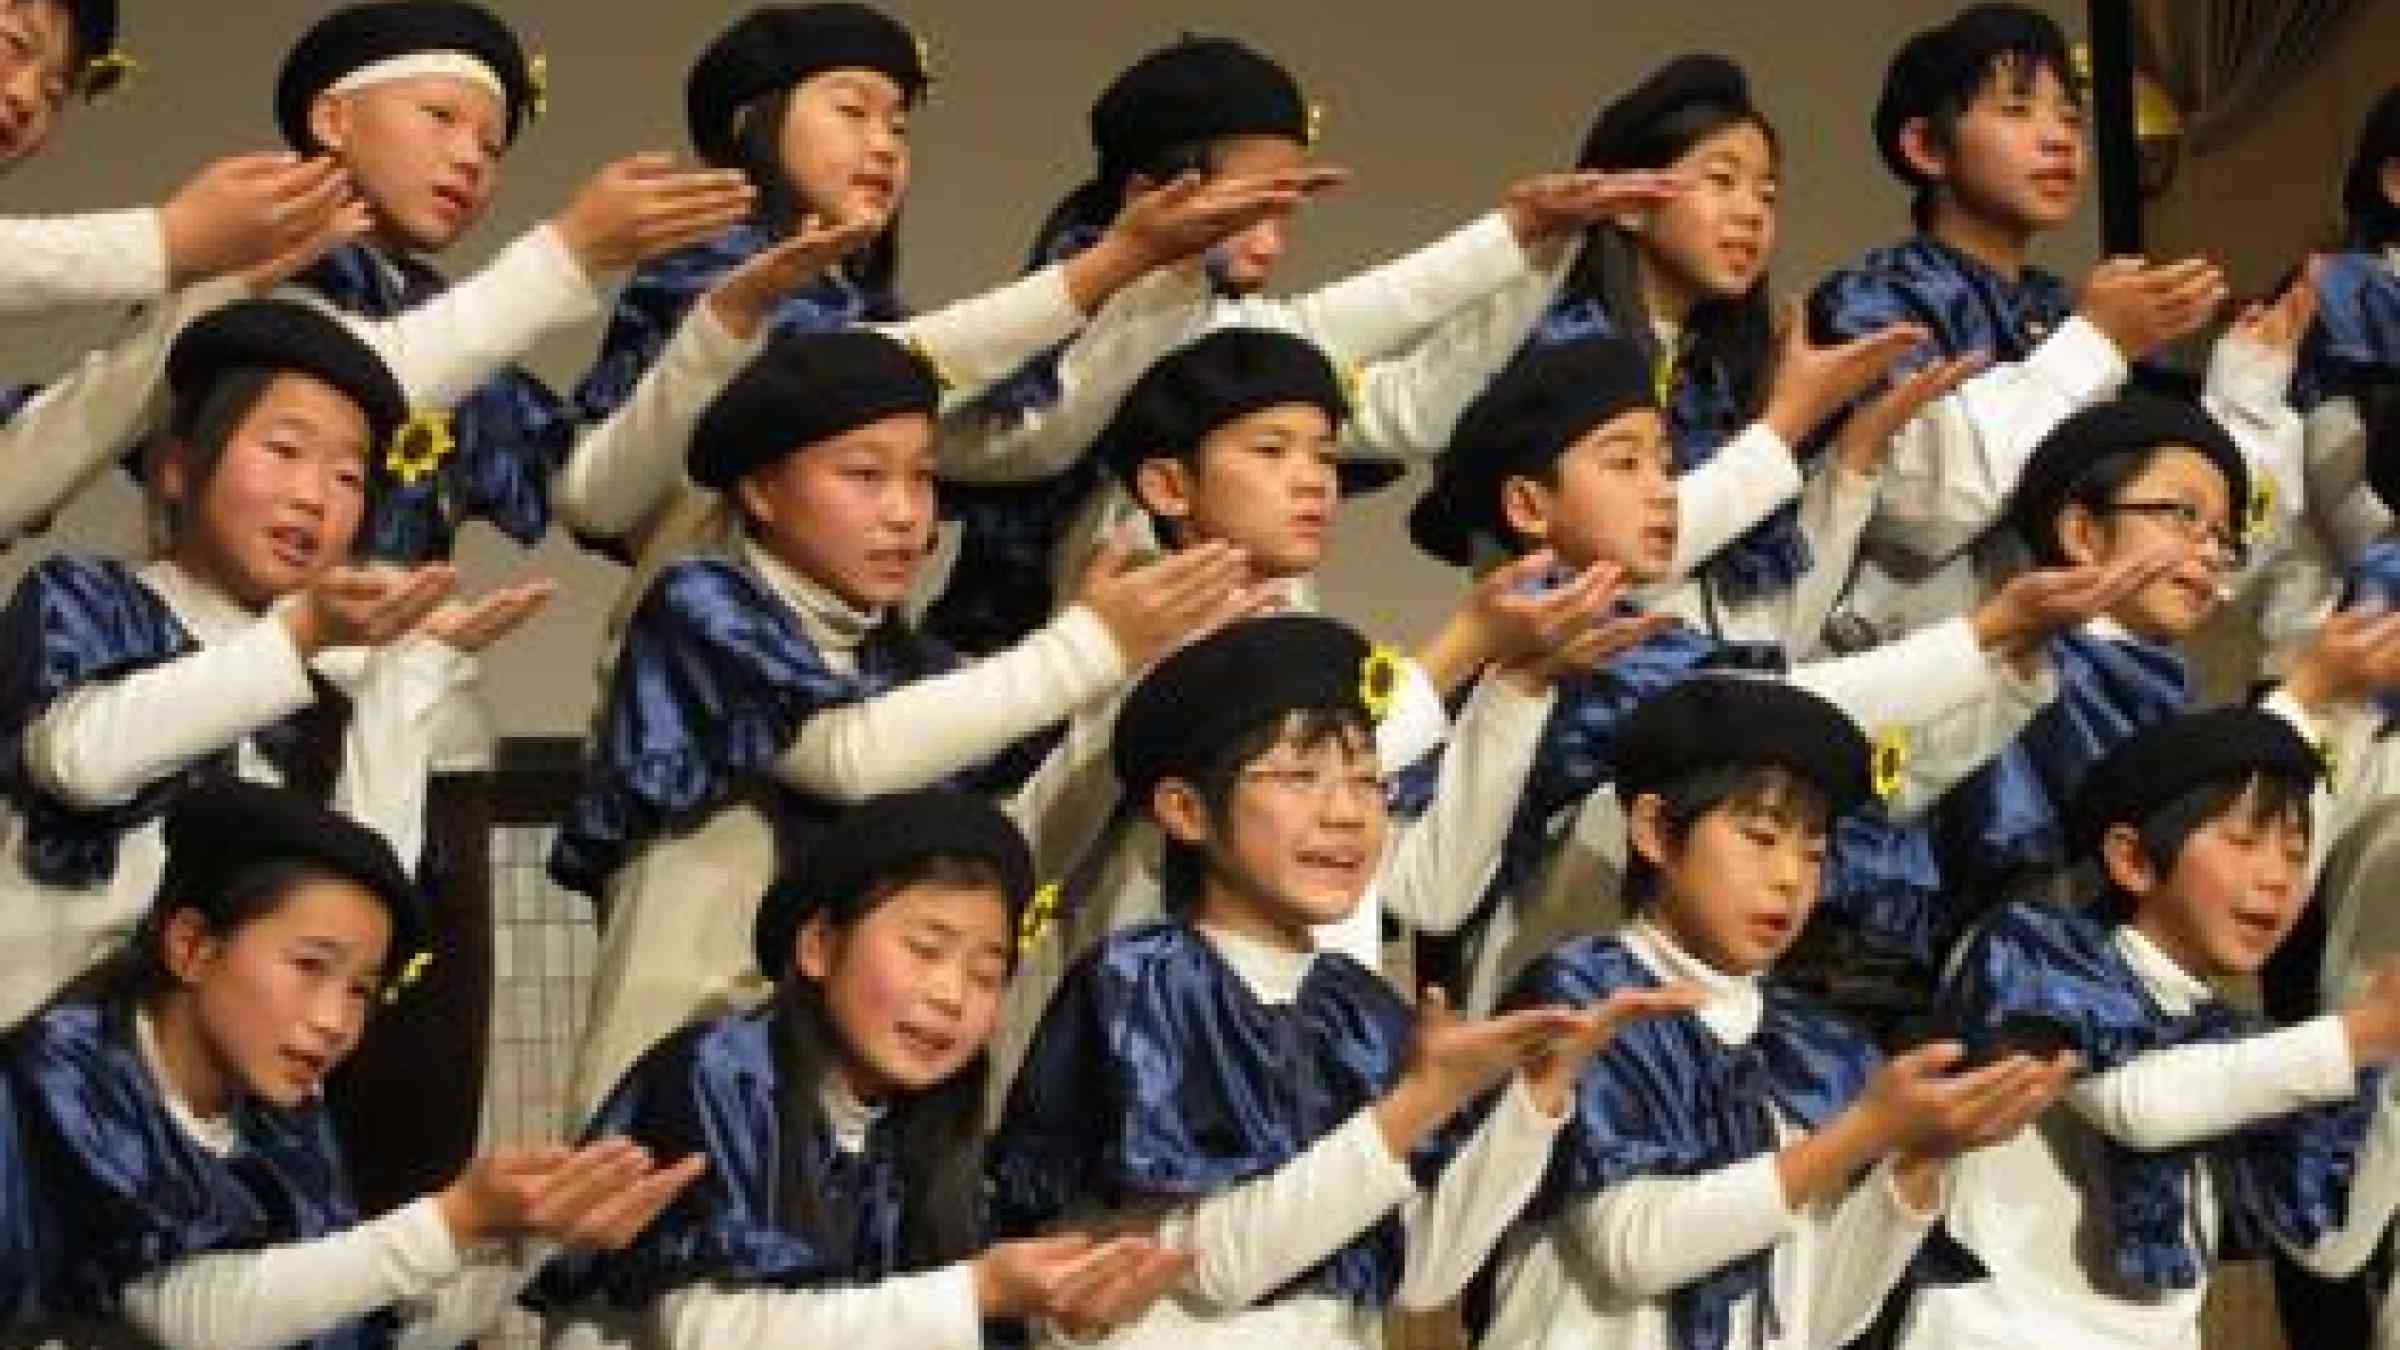 The song ‘Bring Happiness to the World’ has become a rallying call for the city of Kobe. Here children of Nishinada Elementary School perform it at JICA symposium on 18 Jan together with Mr. Usui who made this song two weeks after the earthquake. (Photo: UNISDR)